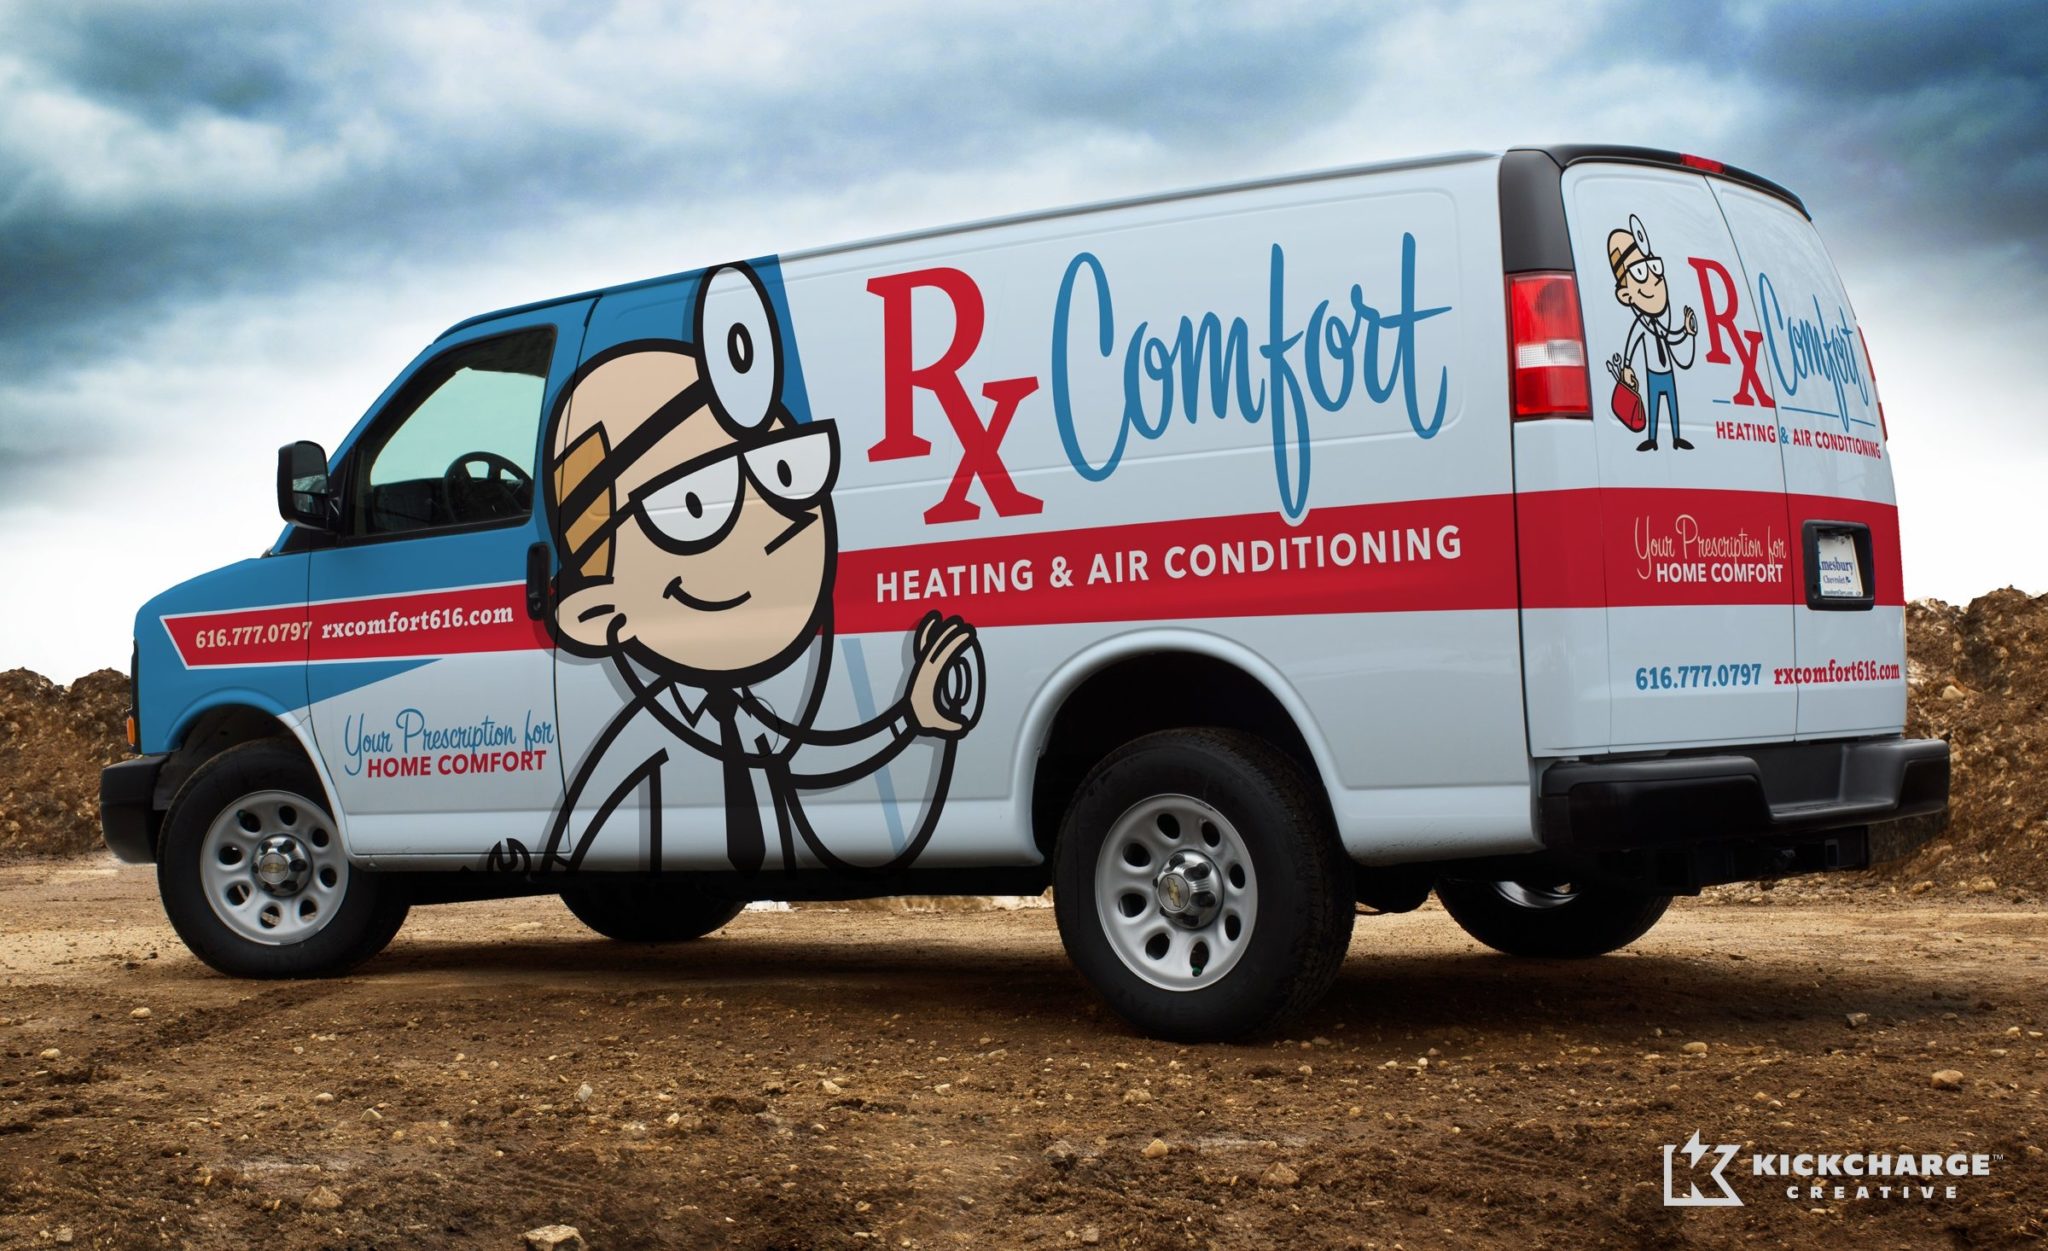 Character driven truck wrap for a heating and AC contractor in Michigan.